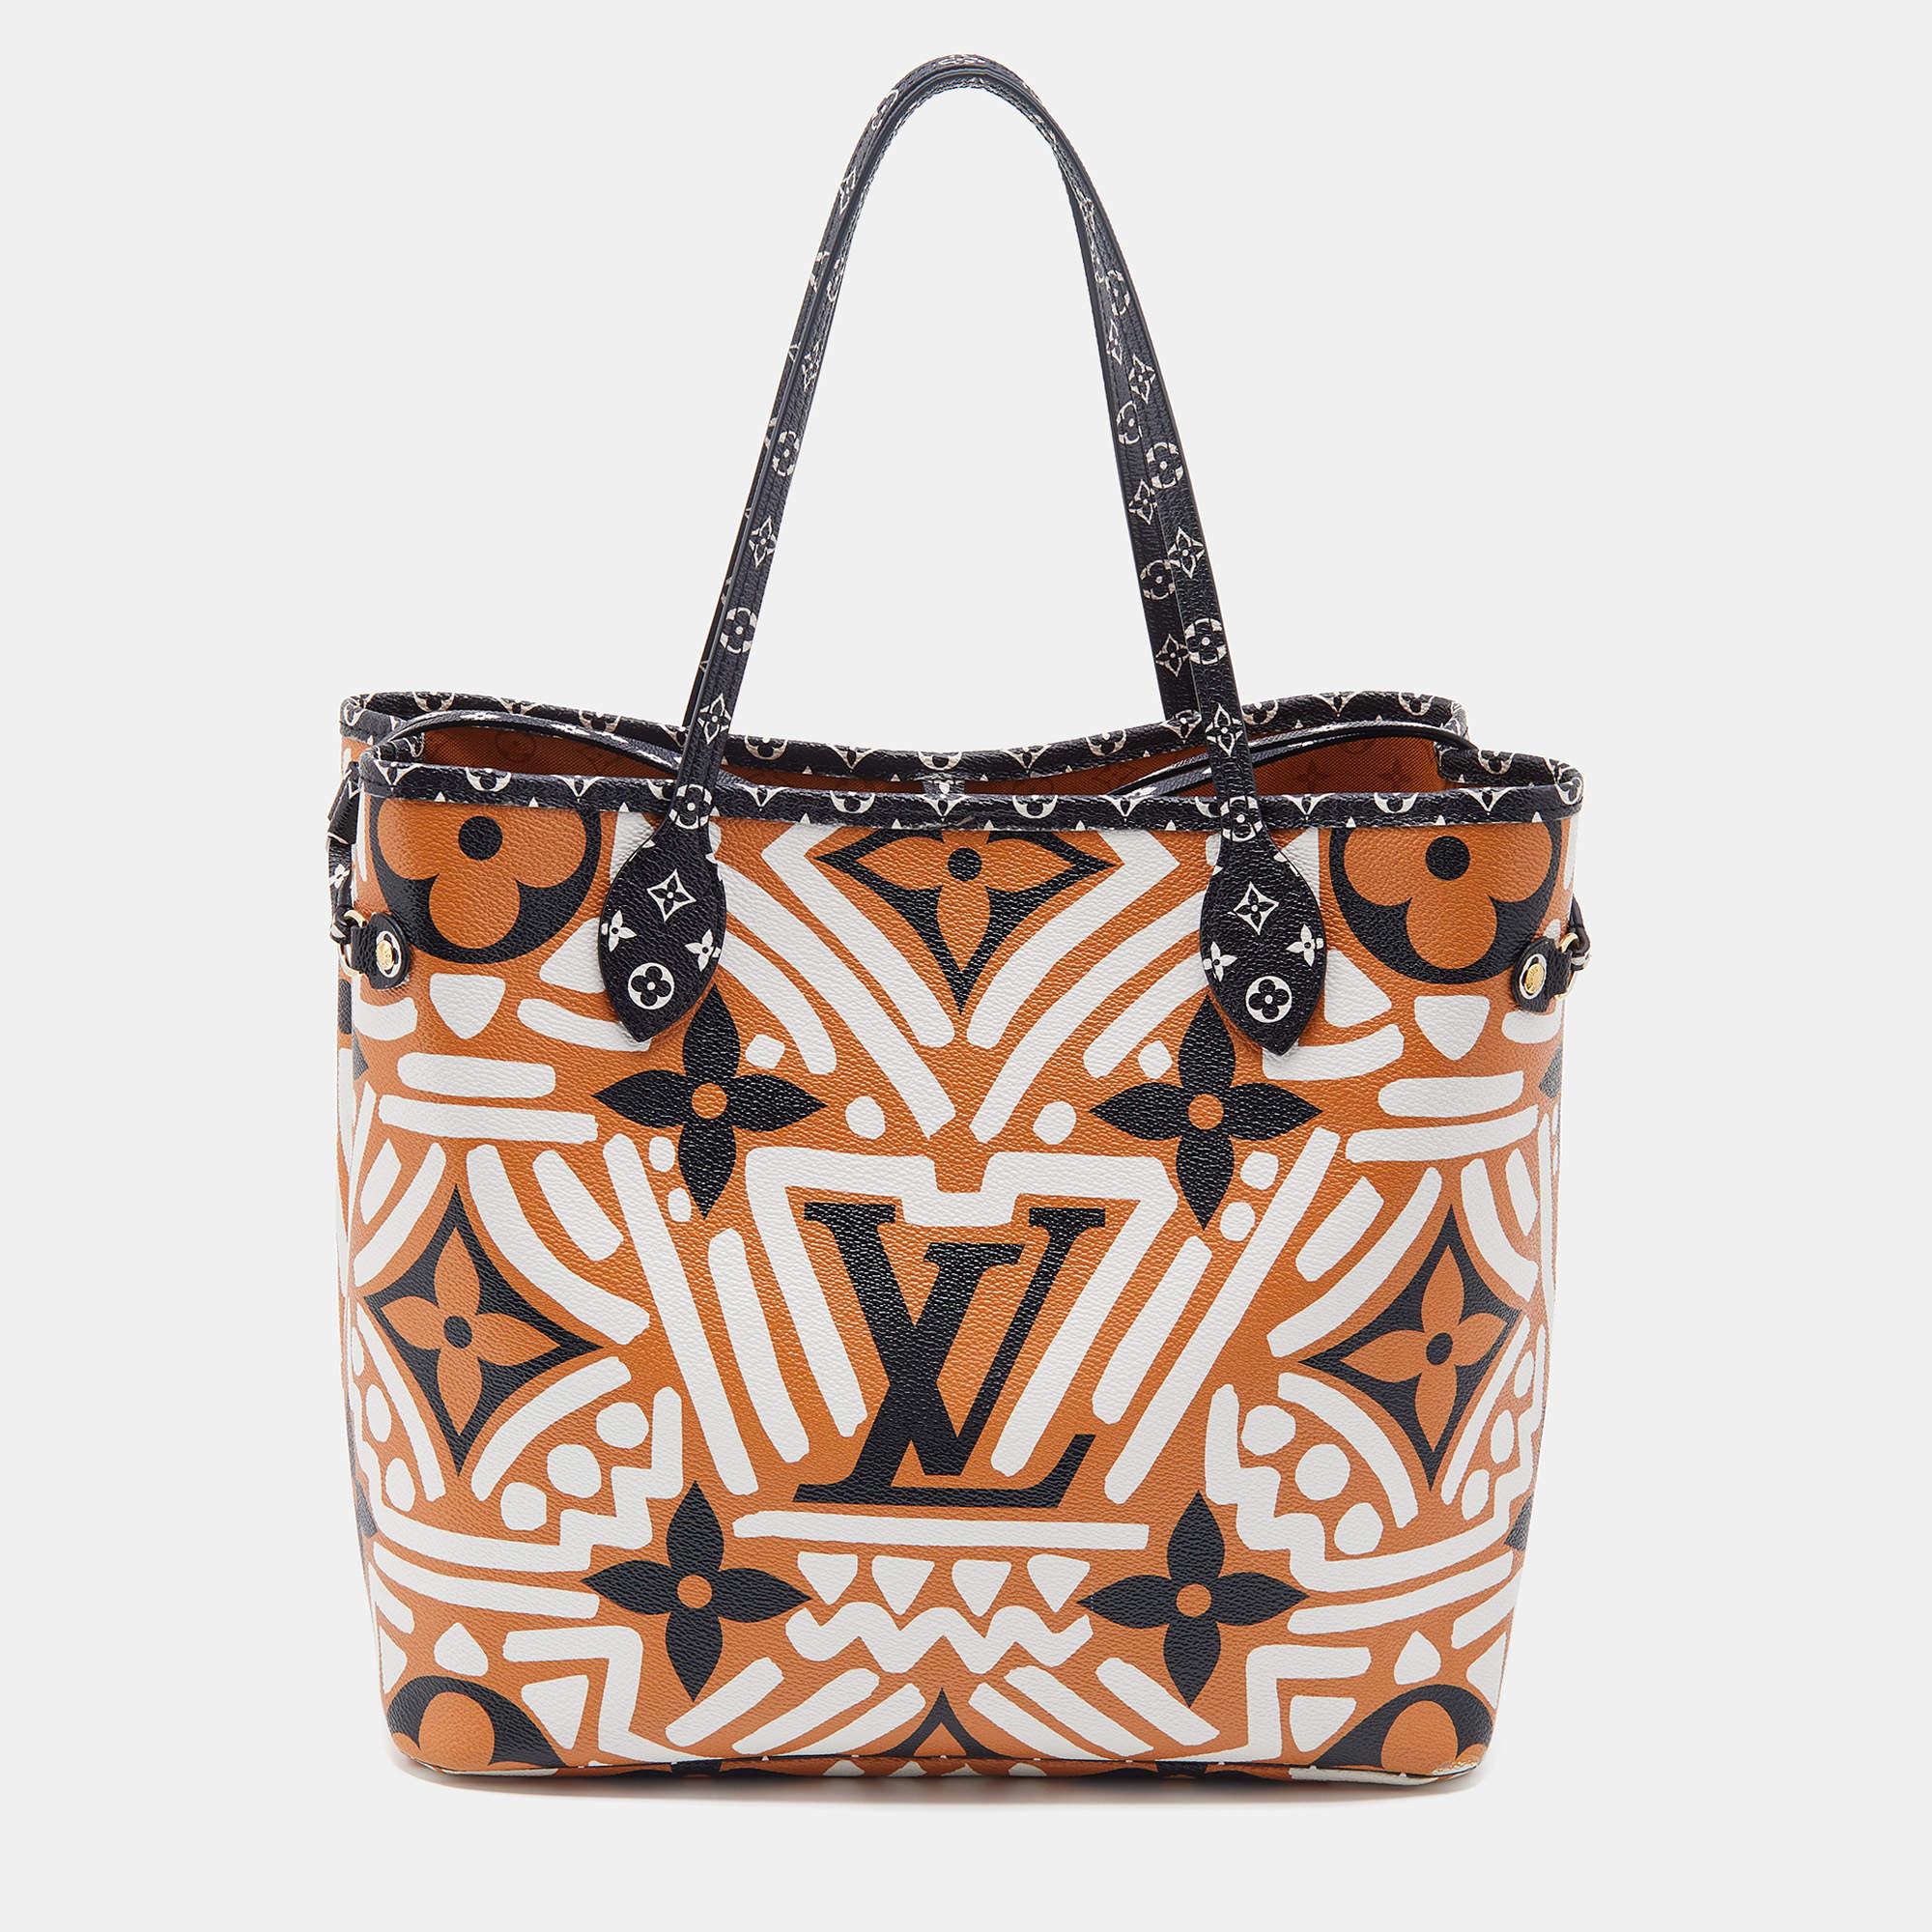 Louis Vuitton’s Neverfull was first introduced in 2007, and even today, it is a popular design. Crafted from Multicolor Giant Monogram canvas, this Limited Edition Crafty Neverfull is gorgeous. The bag has drawstrings on the sides, a spacious canvas